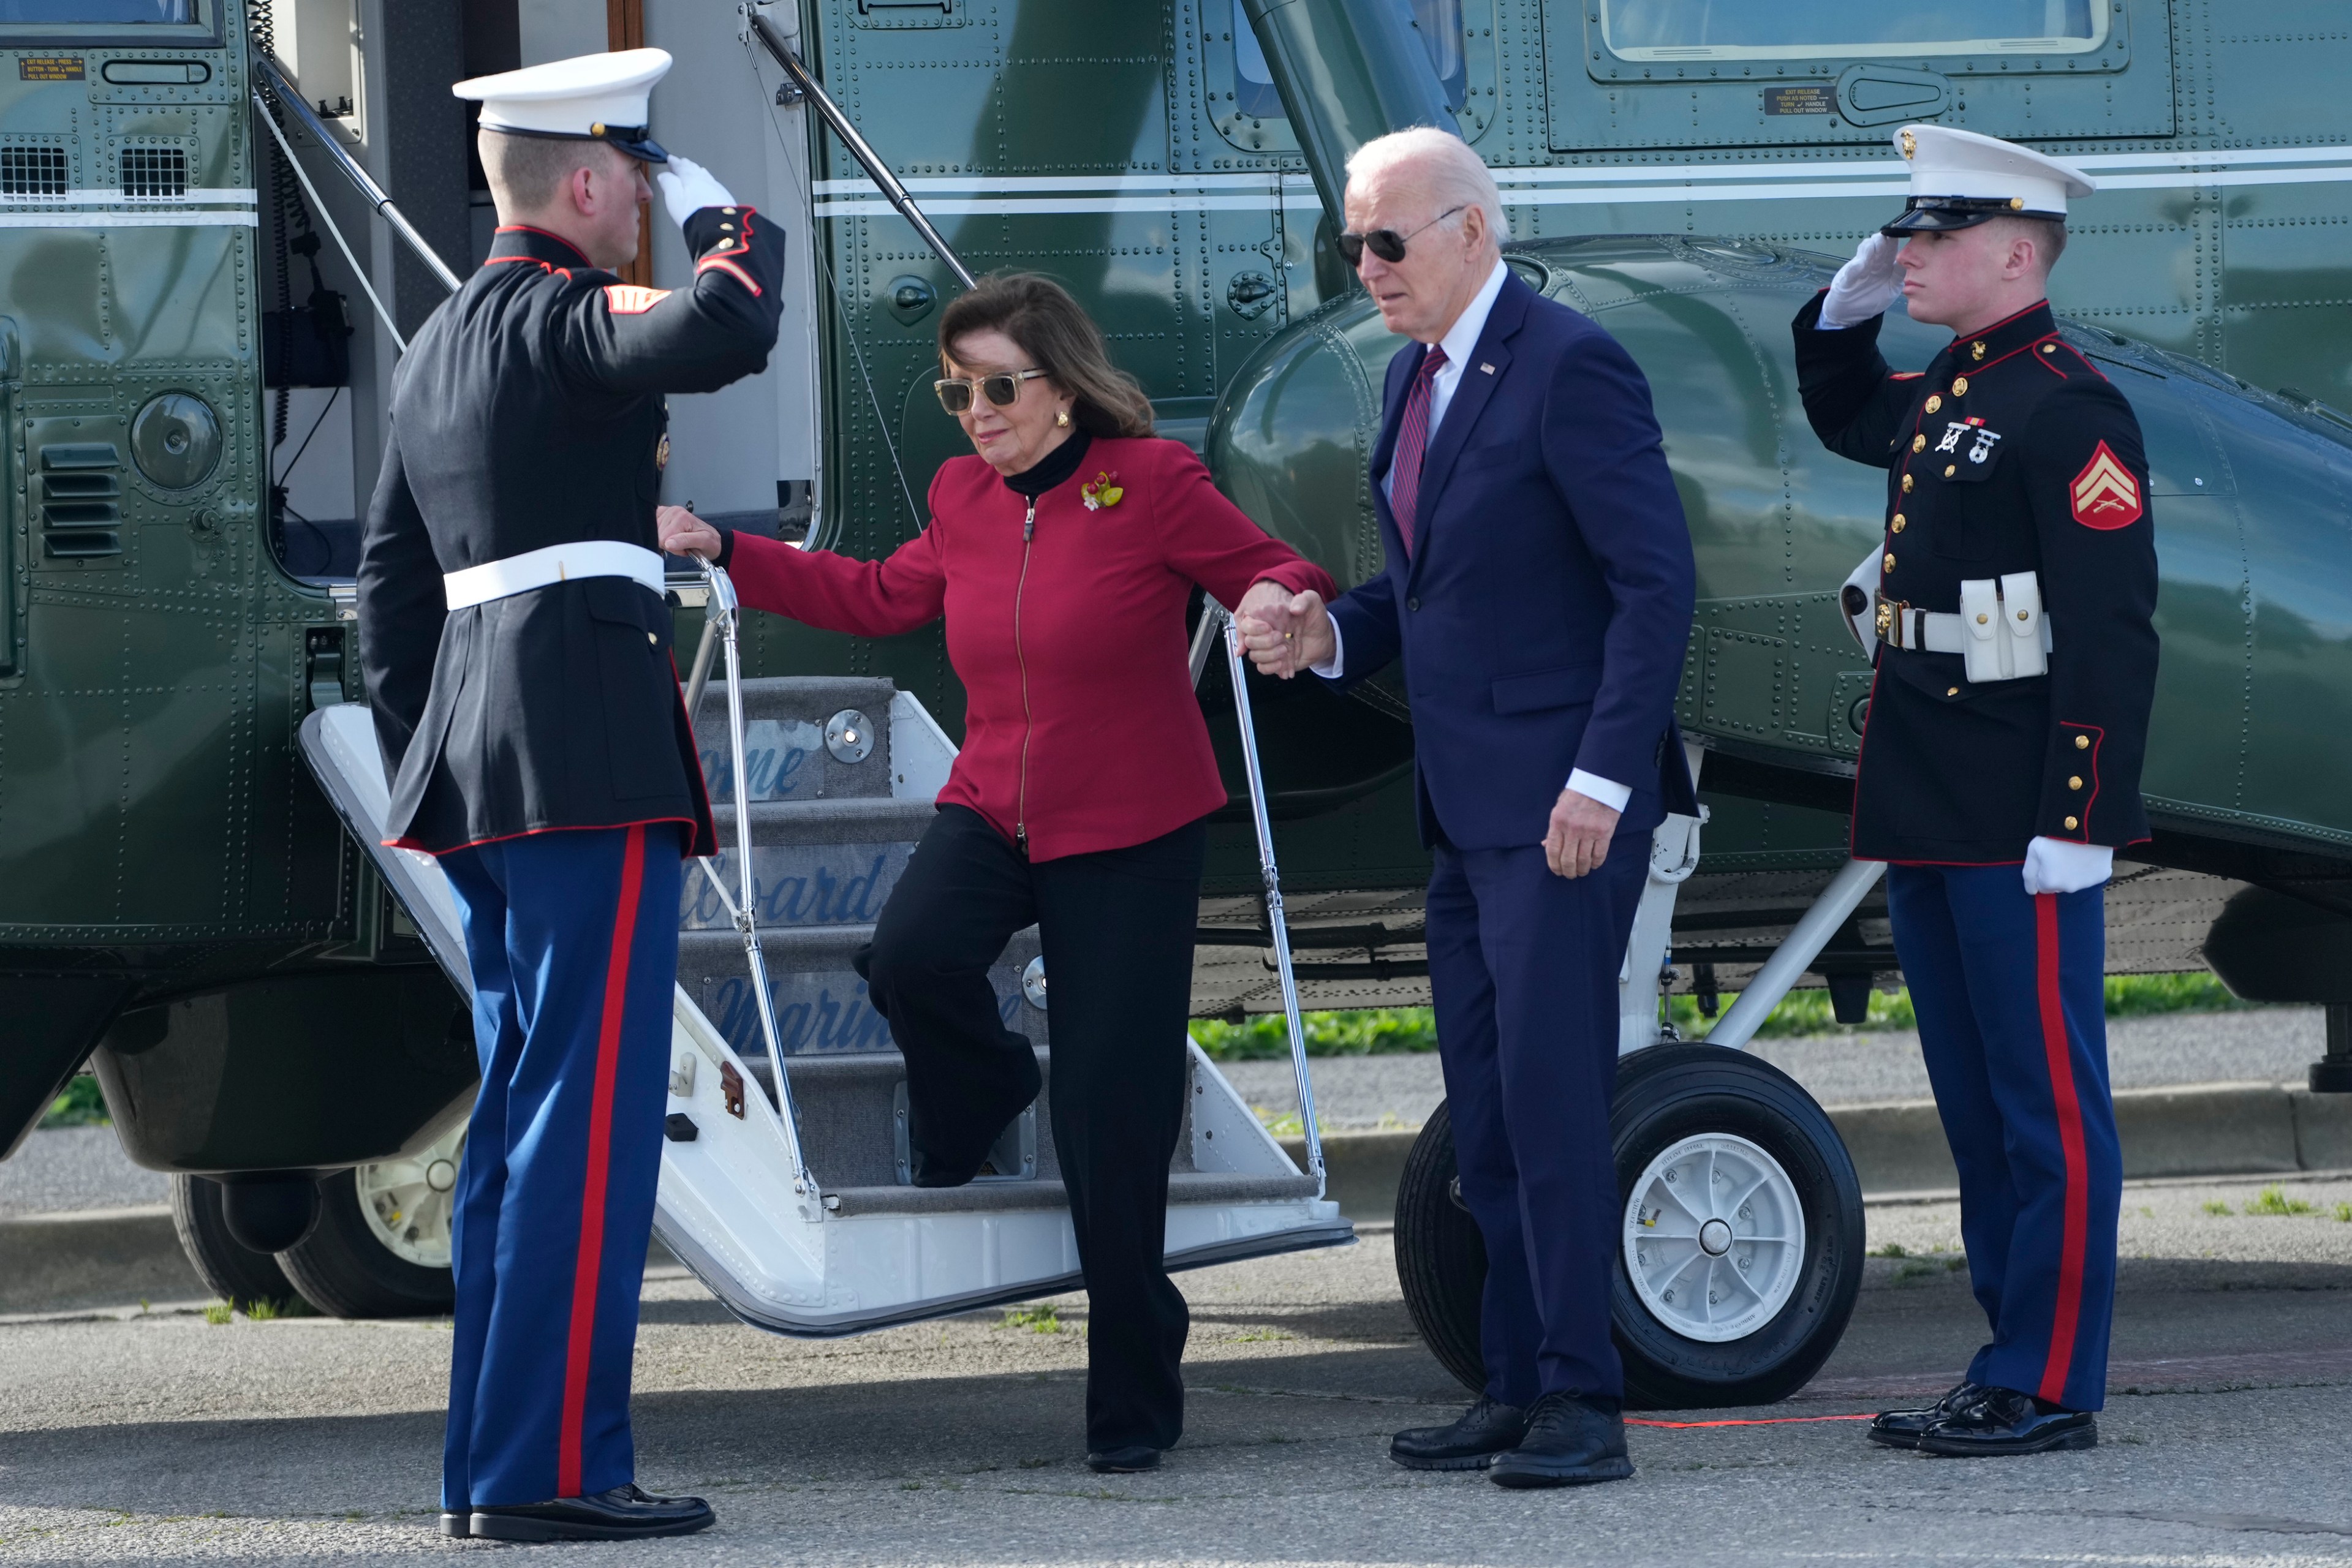 Nancy Pelosi steps off a helicopter with the help of President Joe Biden as two marines salute on either side.